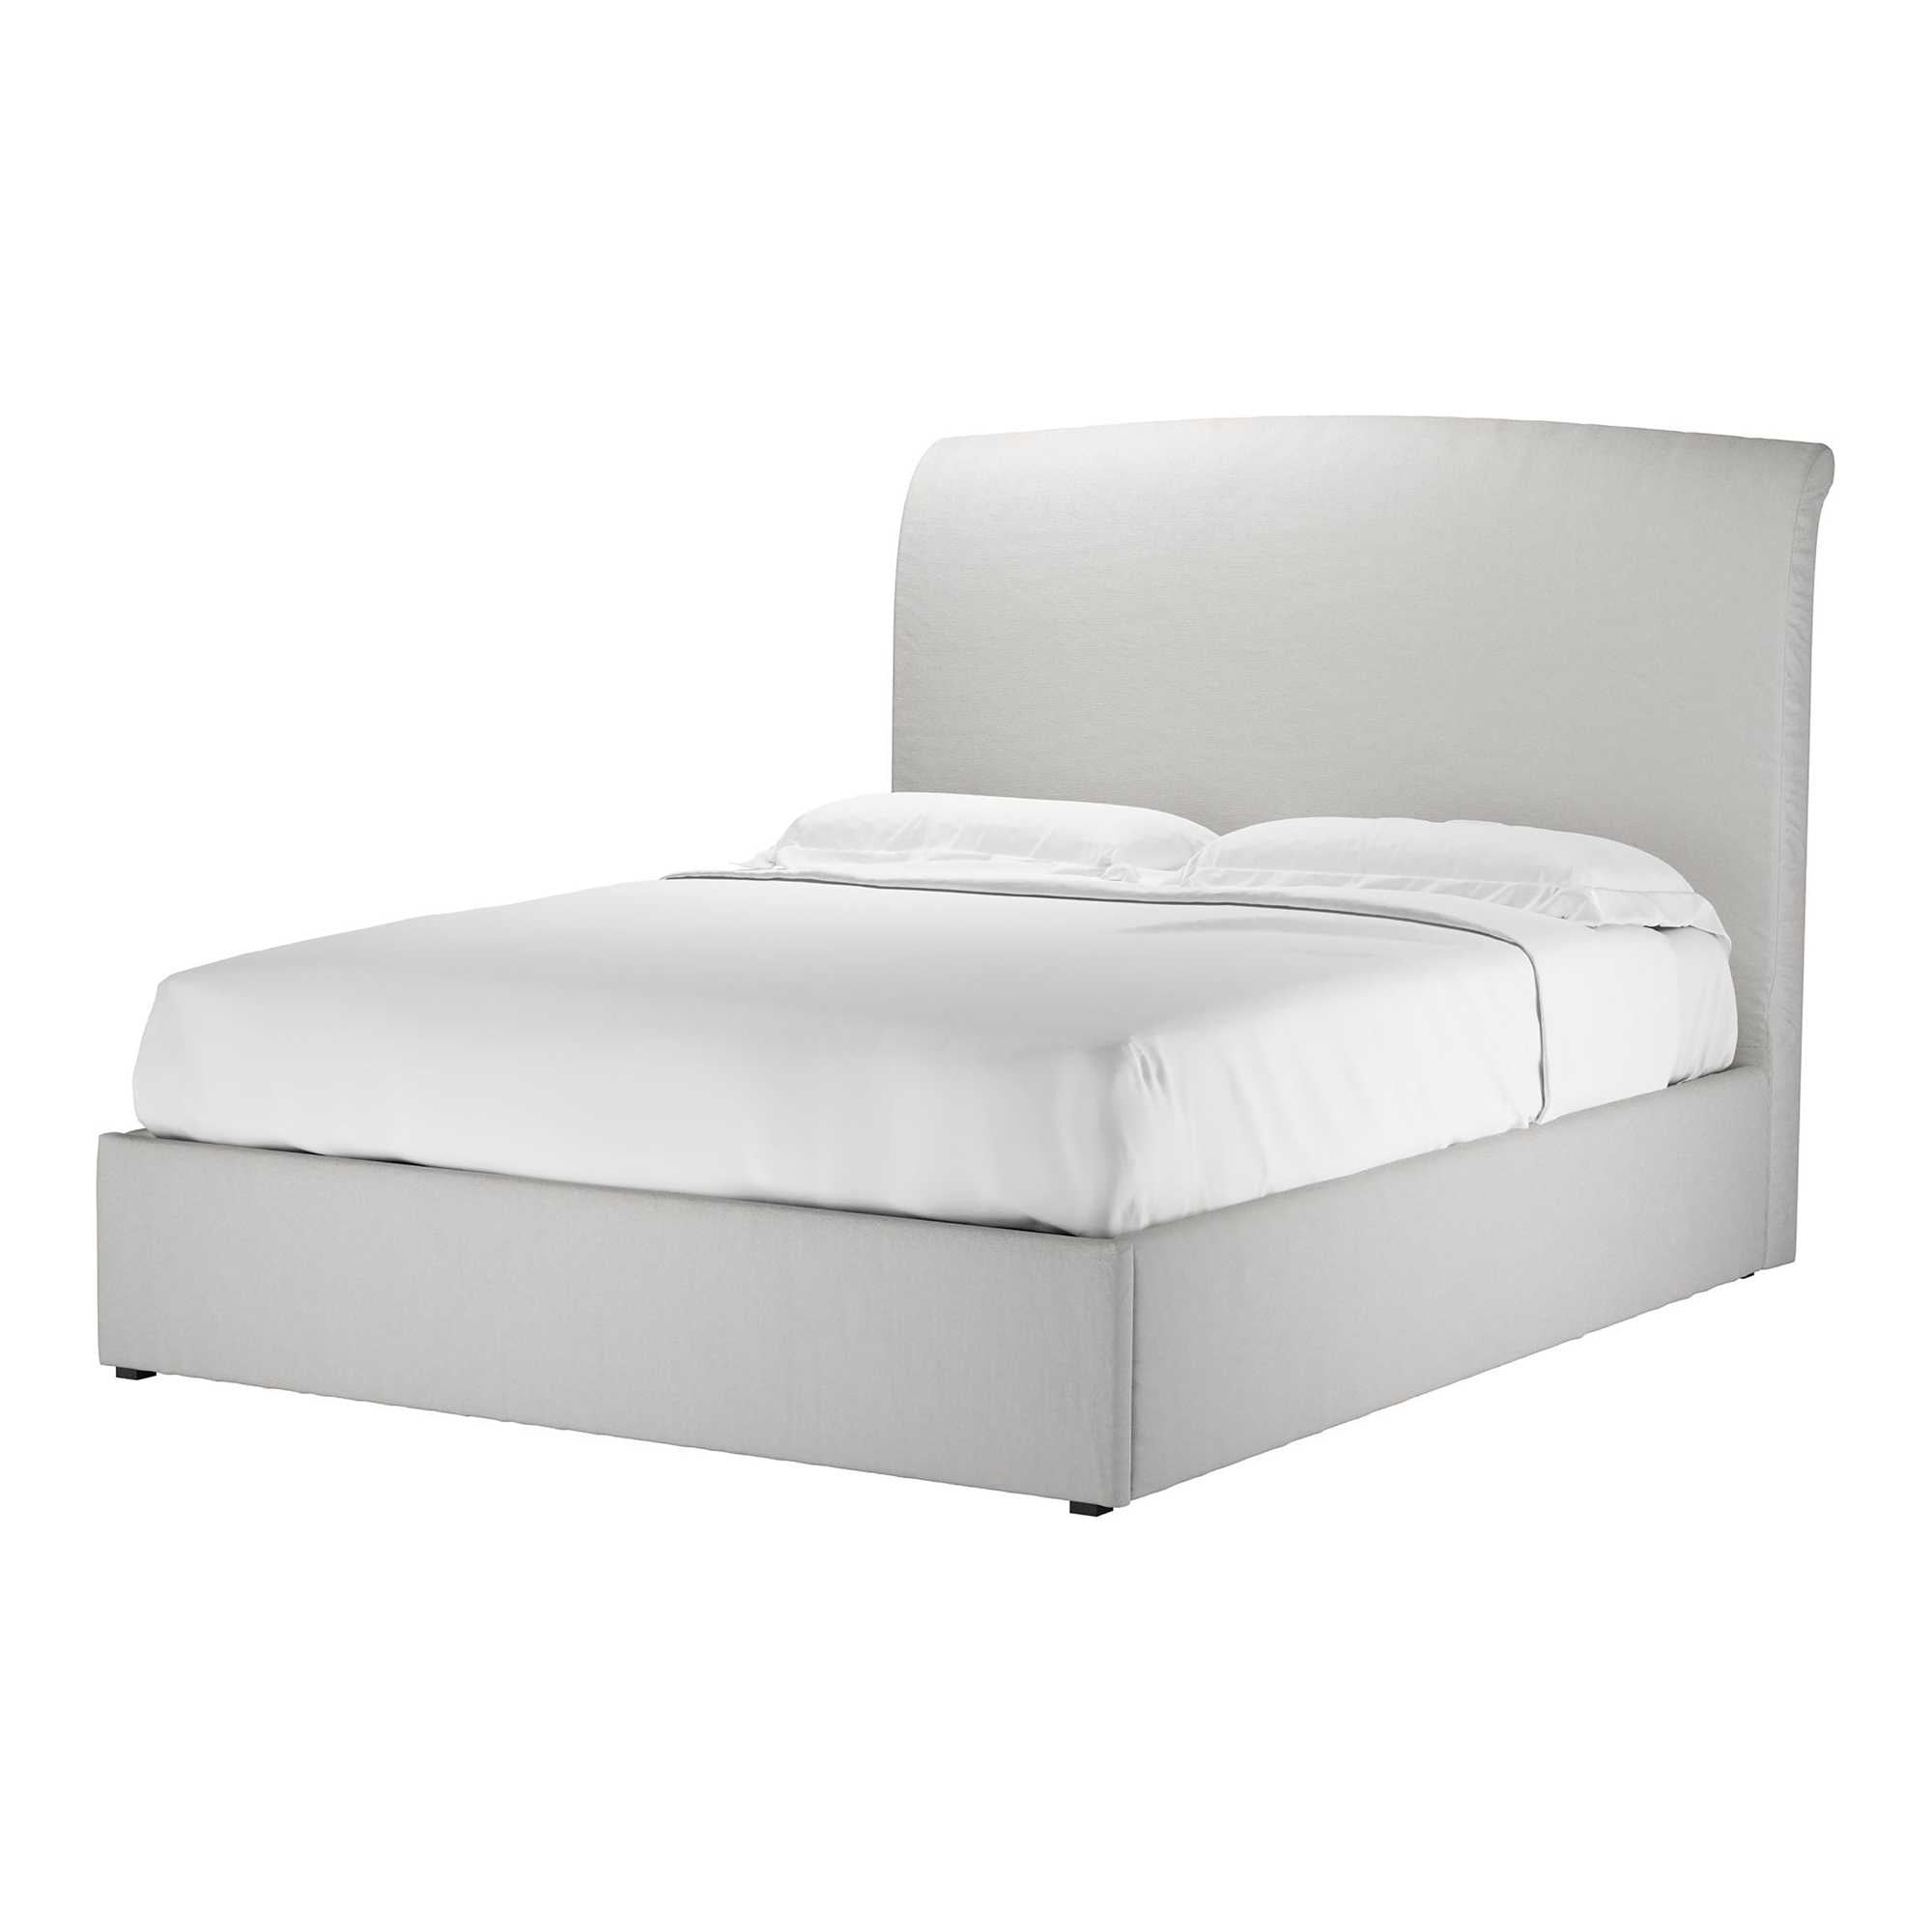 Thea Alabaster Brushed Linen Cotton Ottoman Bed - King Size